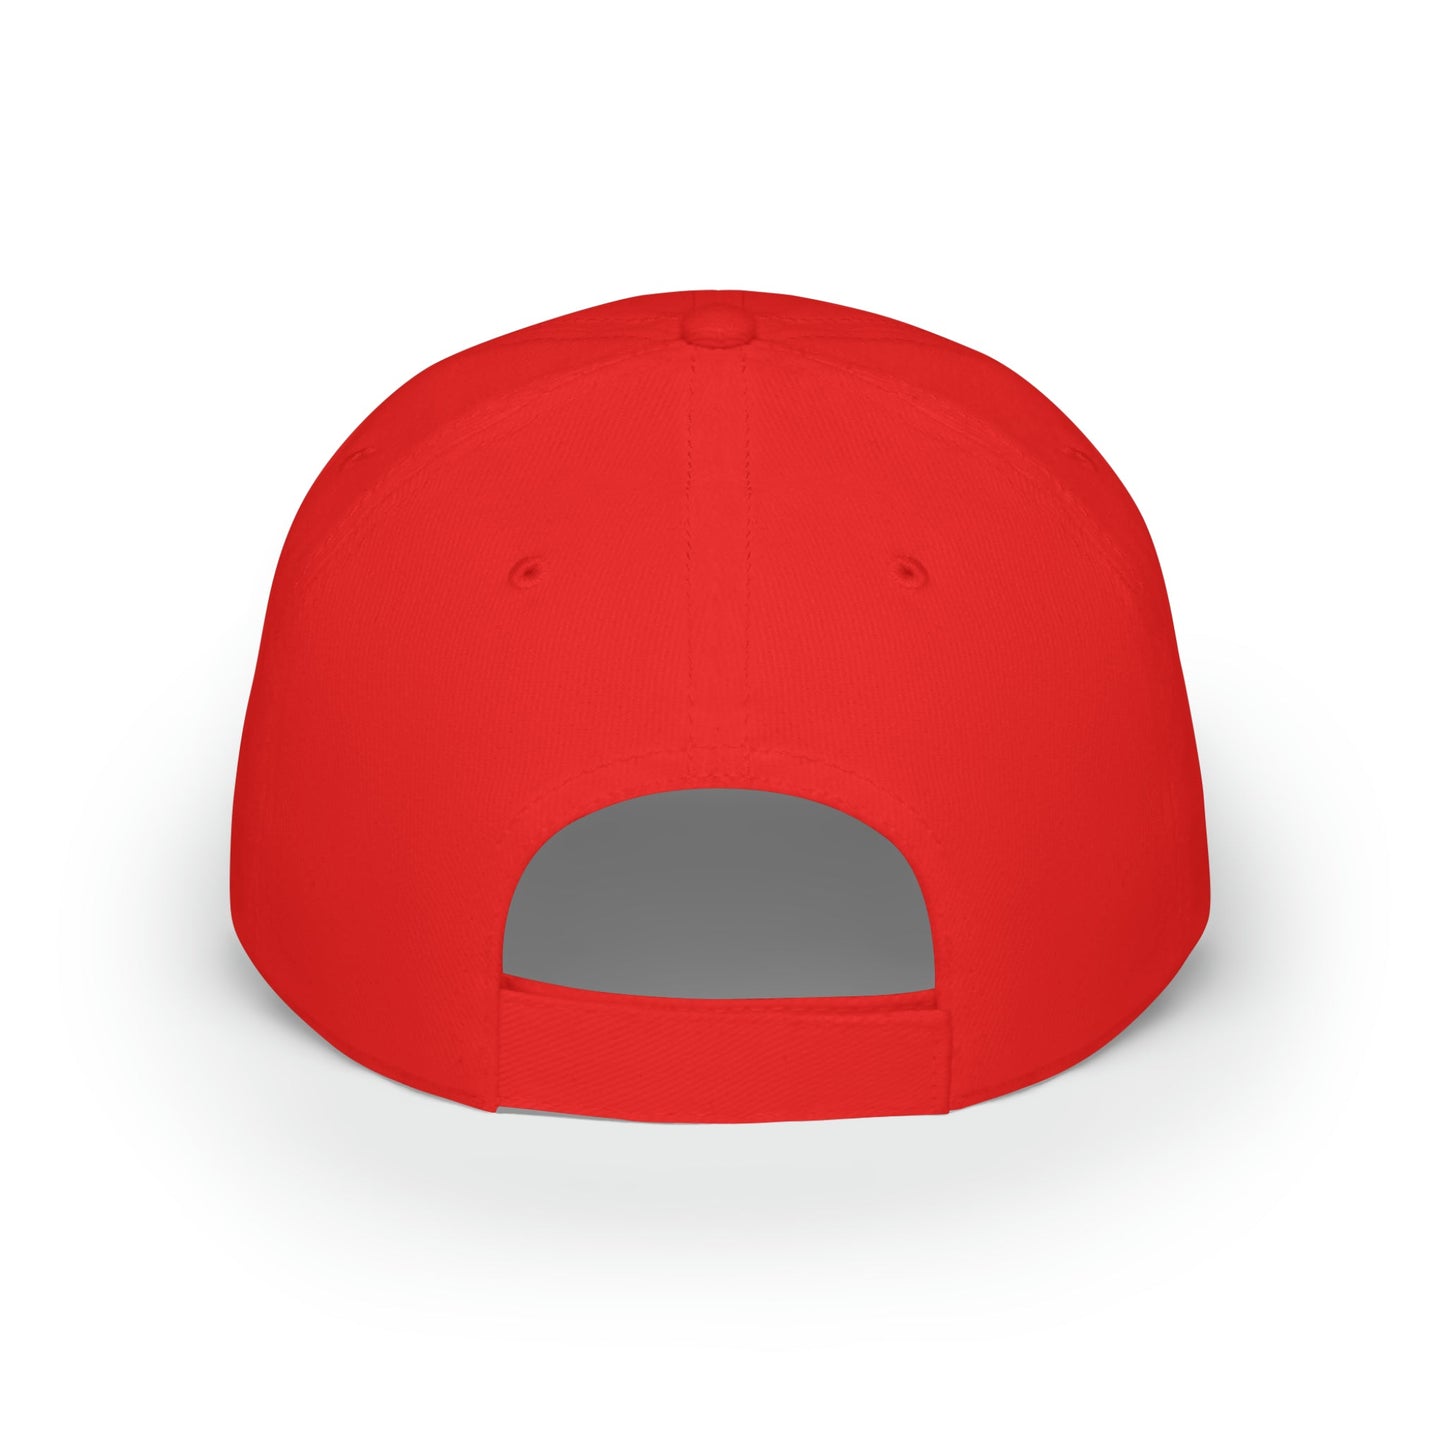 Righteous One Comes Signature Red Baseball Cap with White Cross - Jack Righteous